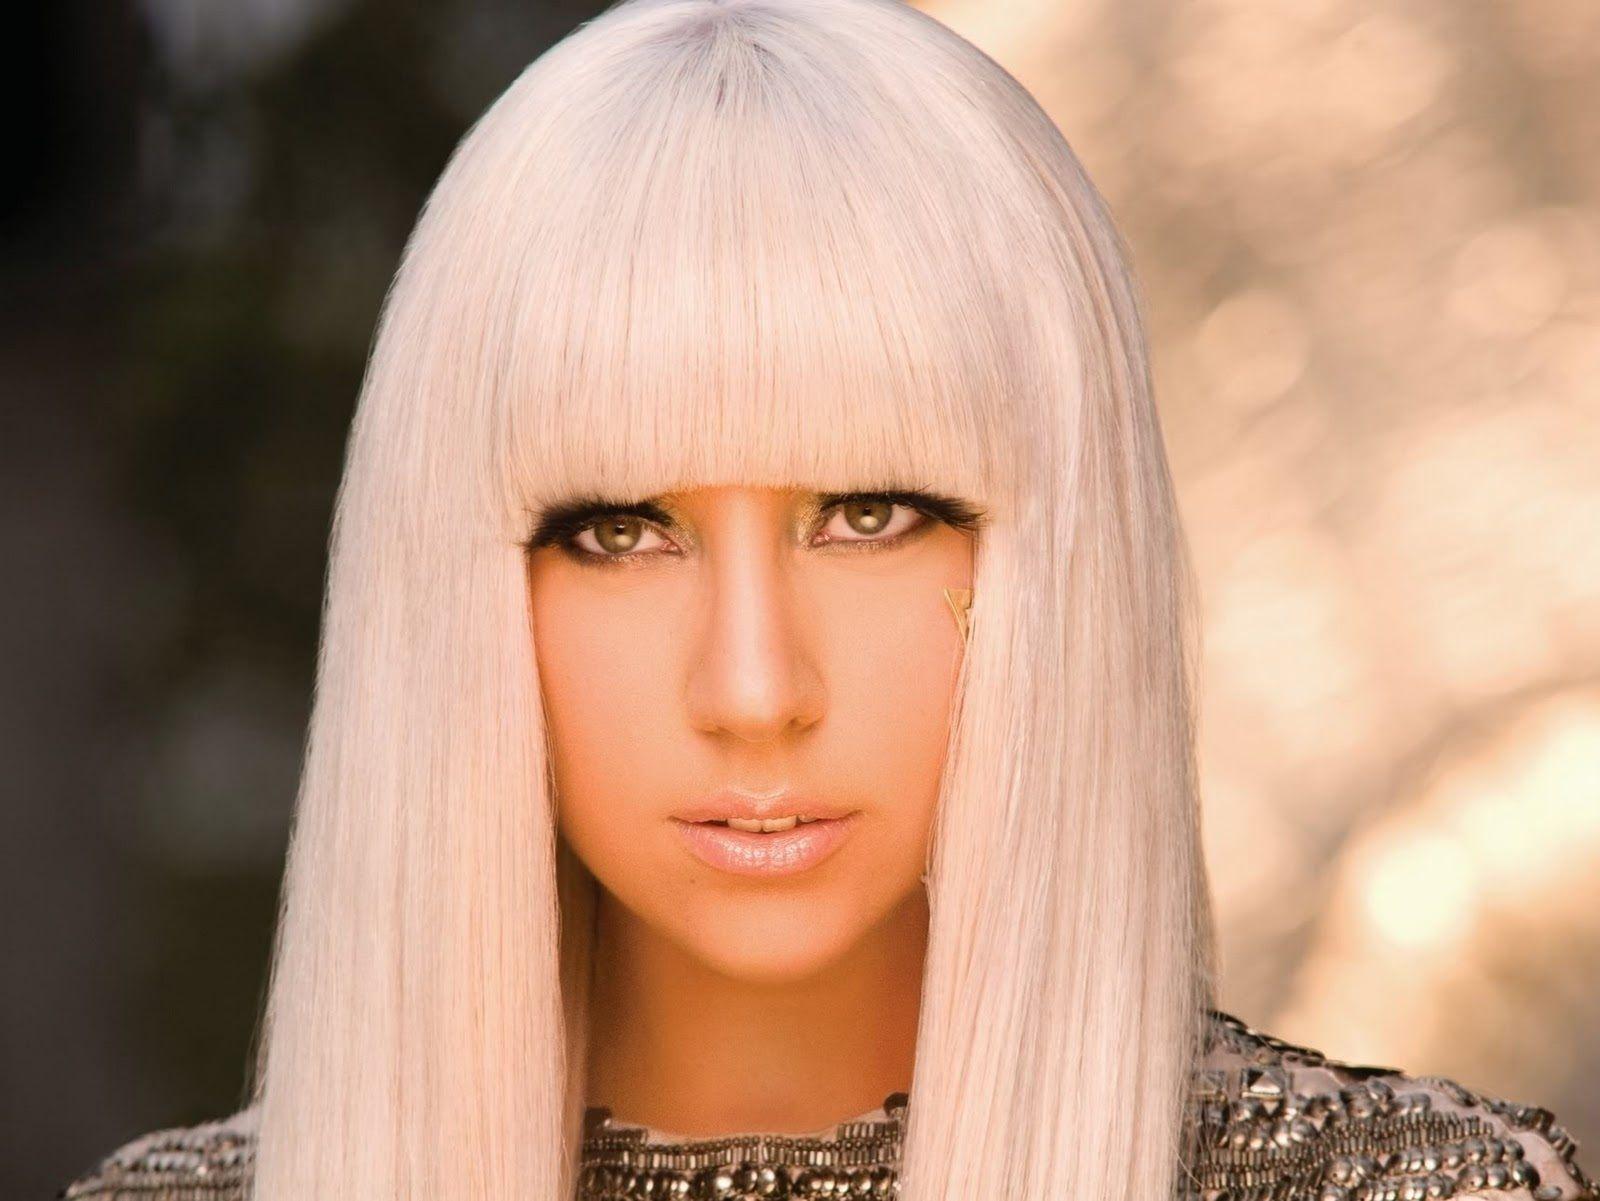 Lady Gaga Poker Face Wallpapers Top Free Lady Gaga Poker Face Backgrounds Wallpaperaccess